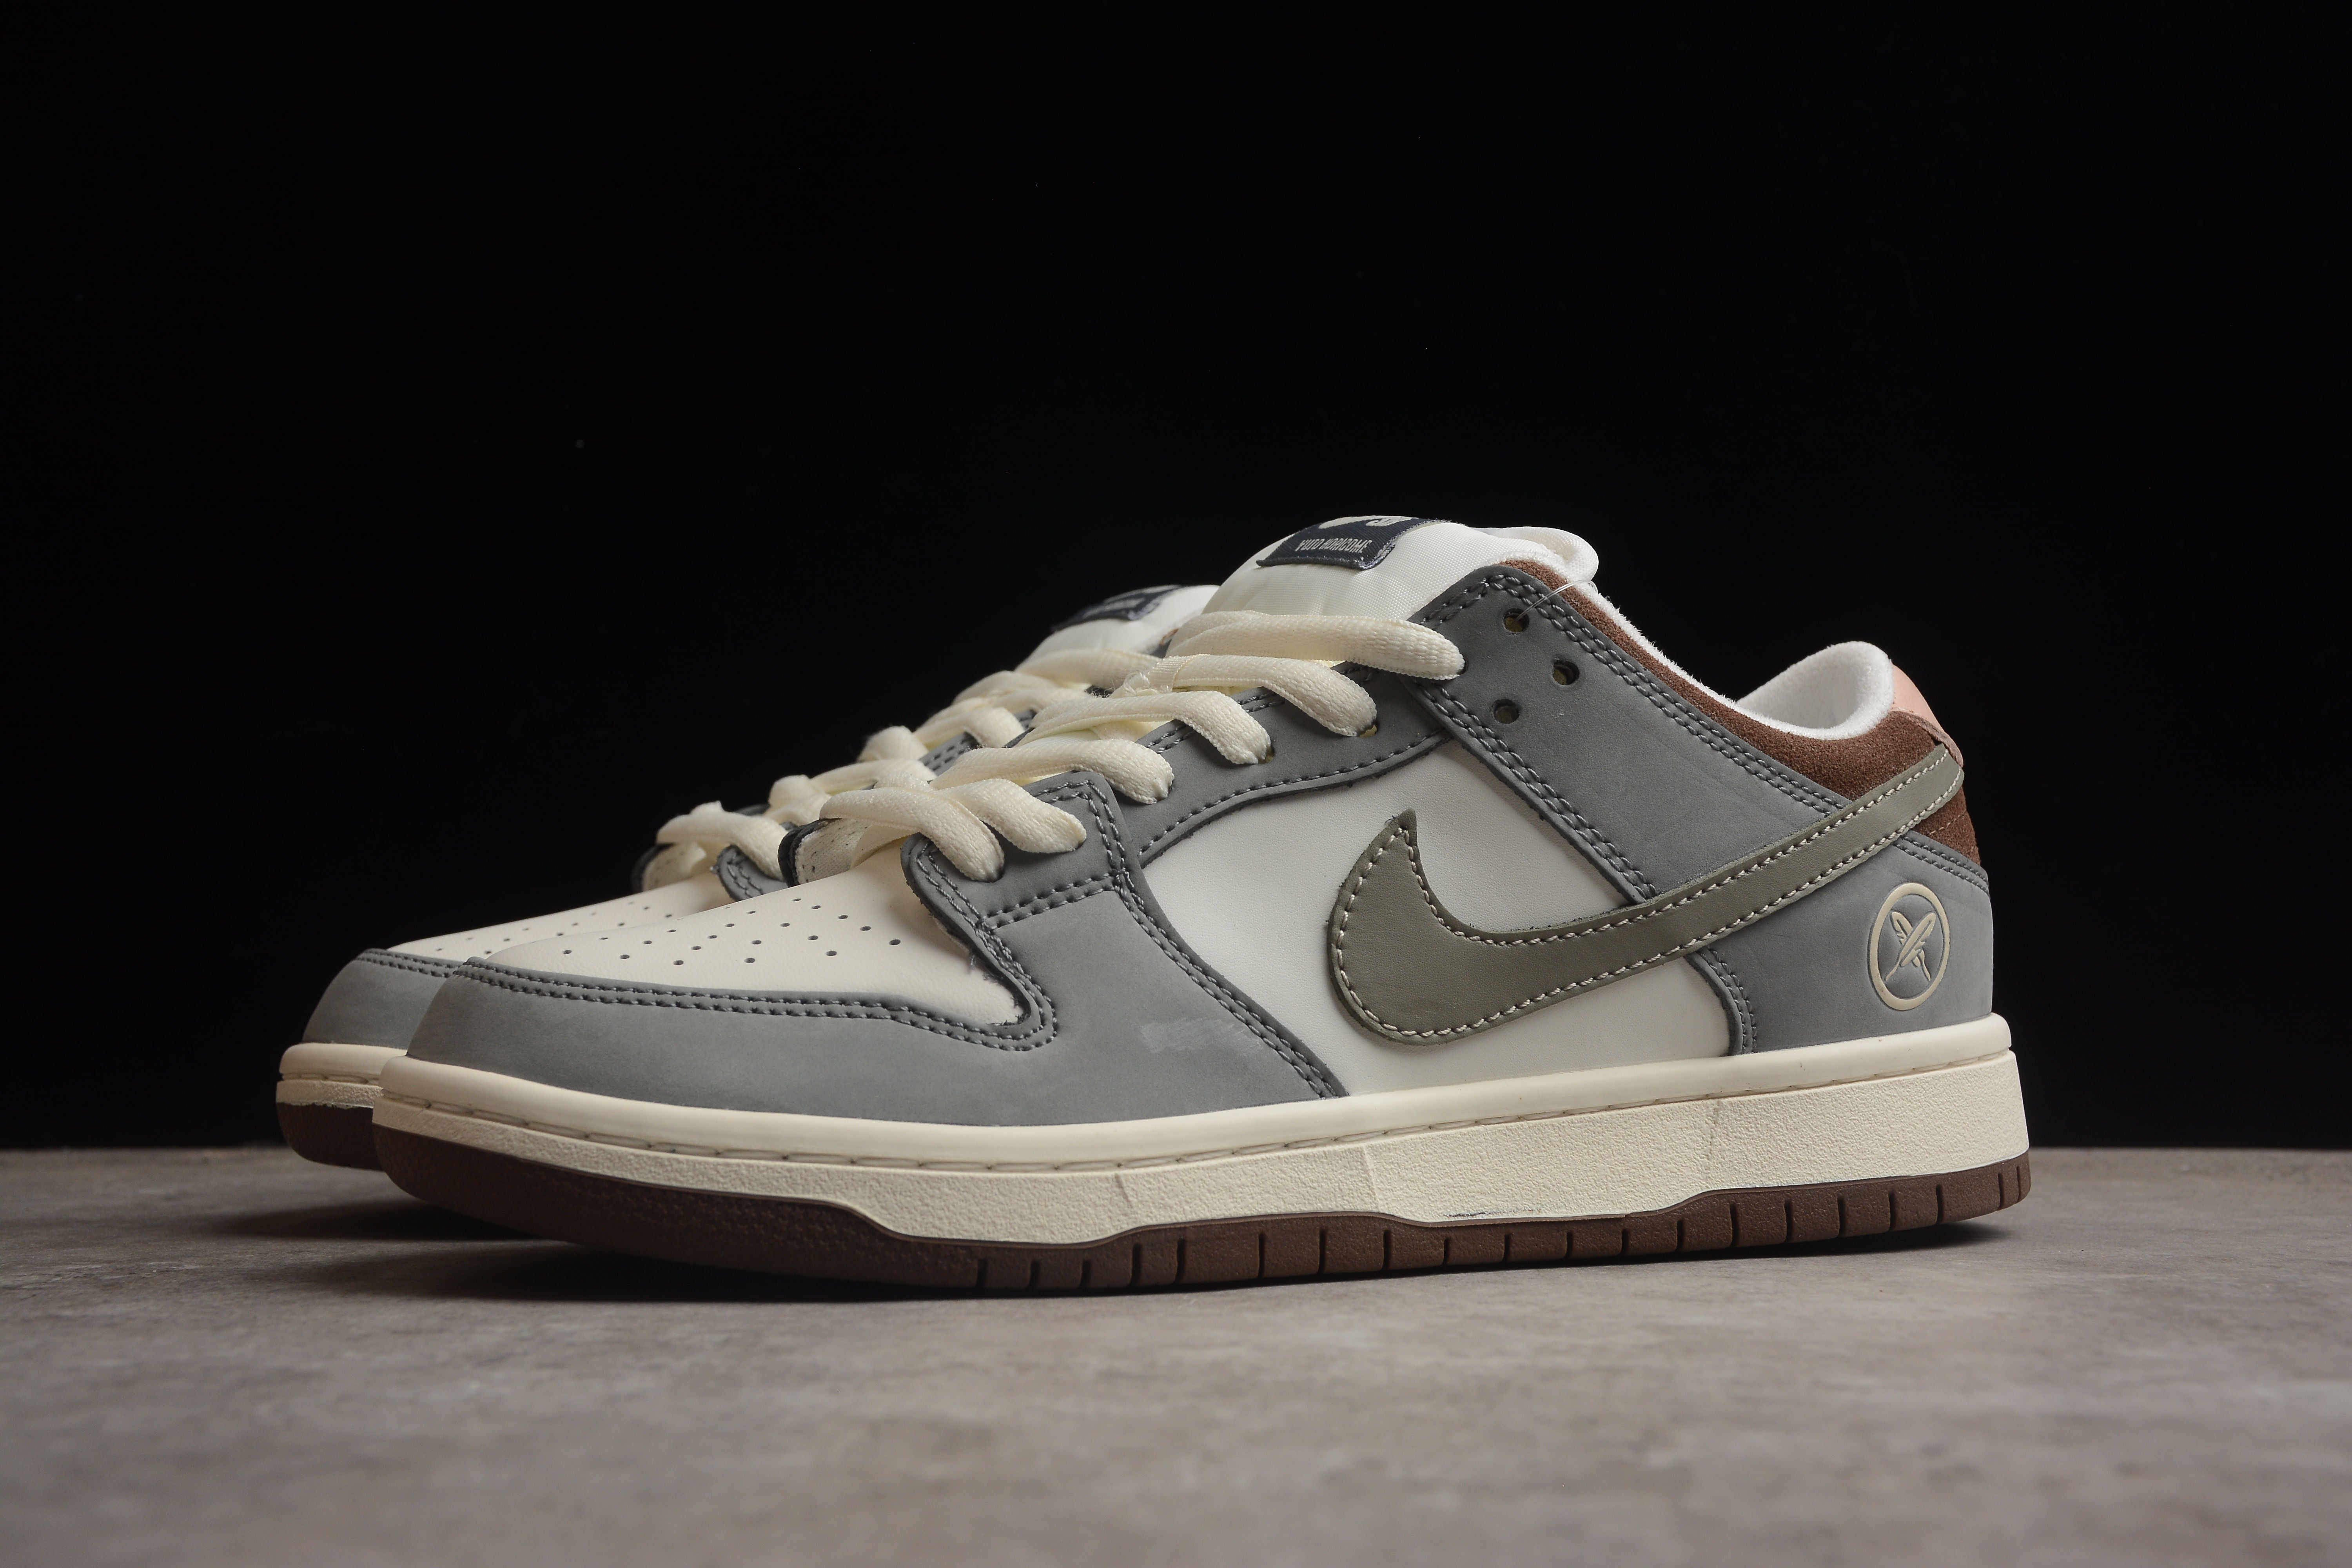 Nike SB dunk low joint grey white shoes